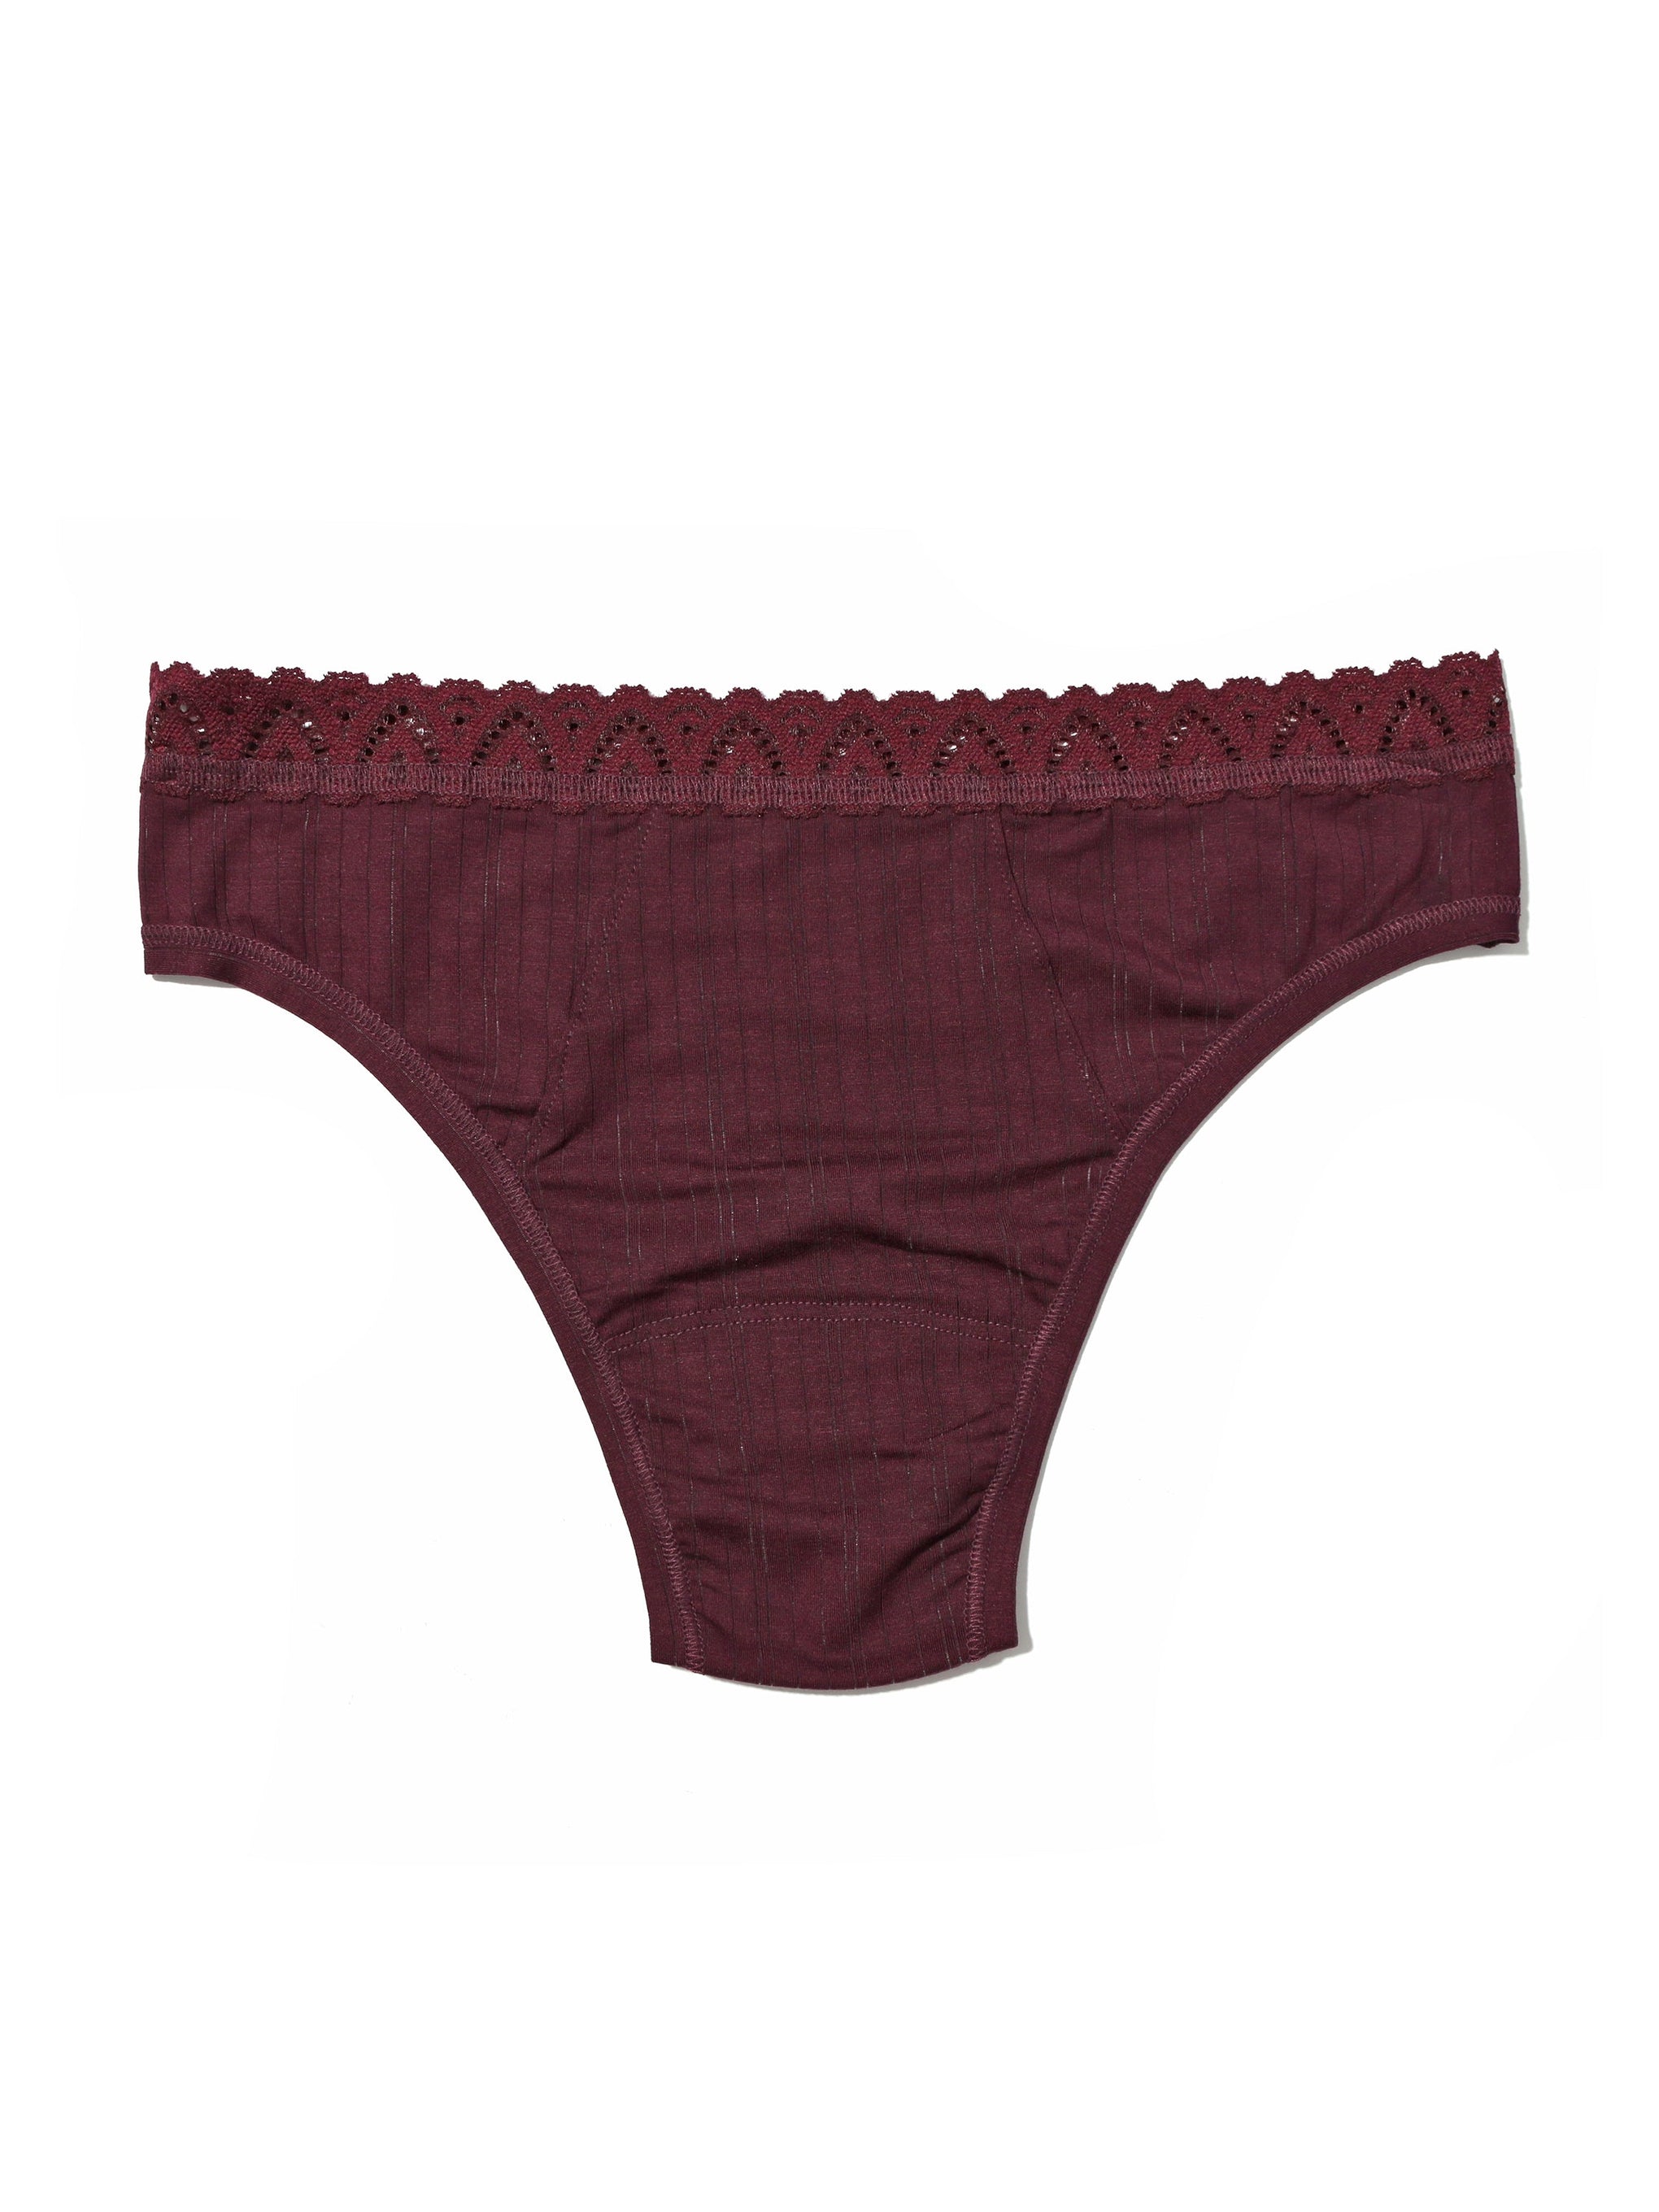 MellowLuxe™ Low Rise Thong Dried Cherry Red Sale